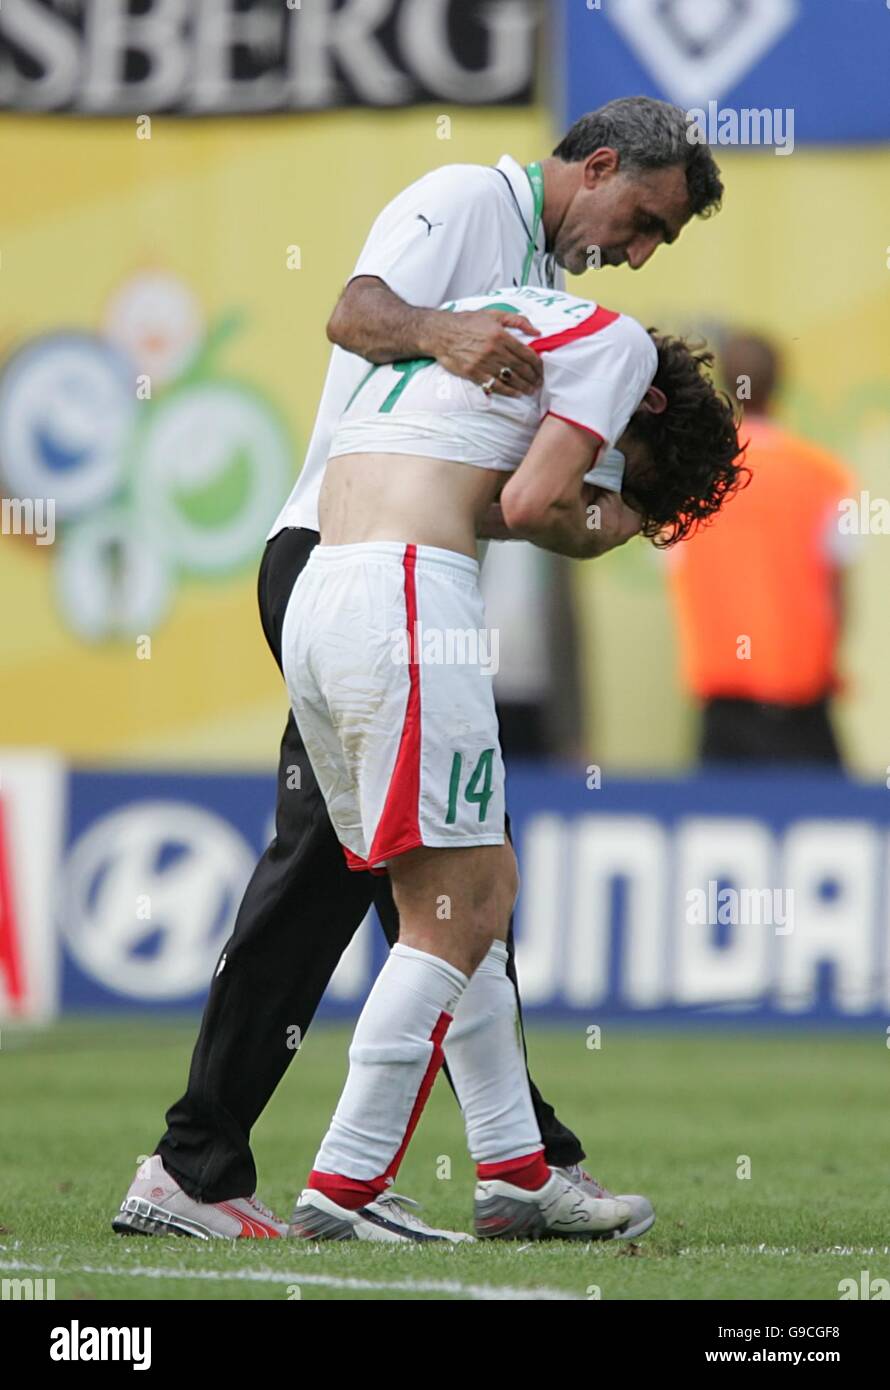 Soccer - 2006 FIFA World Cup Germany - Group D - Iran v Angola - Zentralstadion. Iran's Andranik Teymourian shows his emotion after a draw with Angola meant failing to qualify for the second round Stock Photo